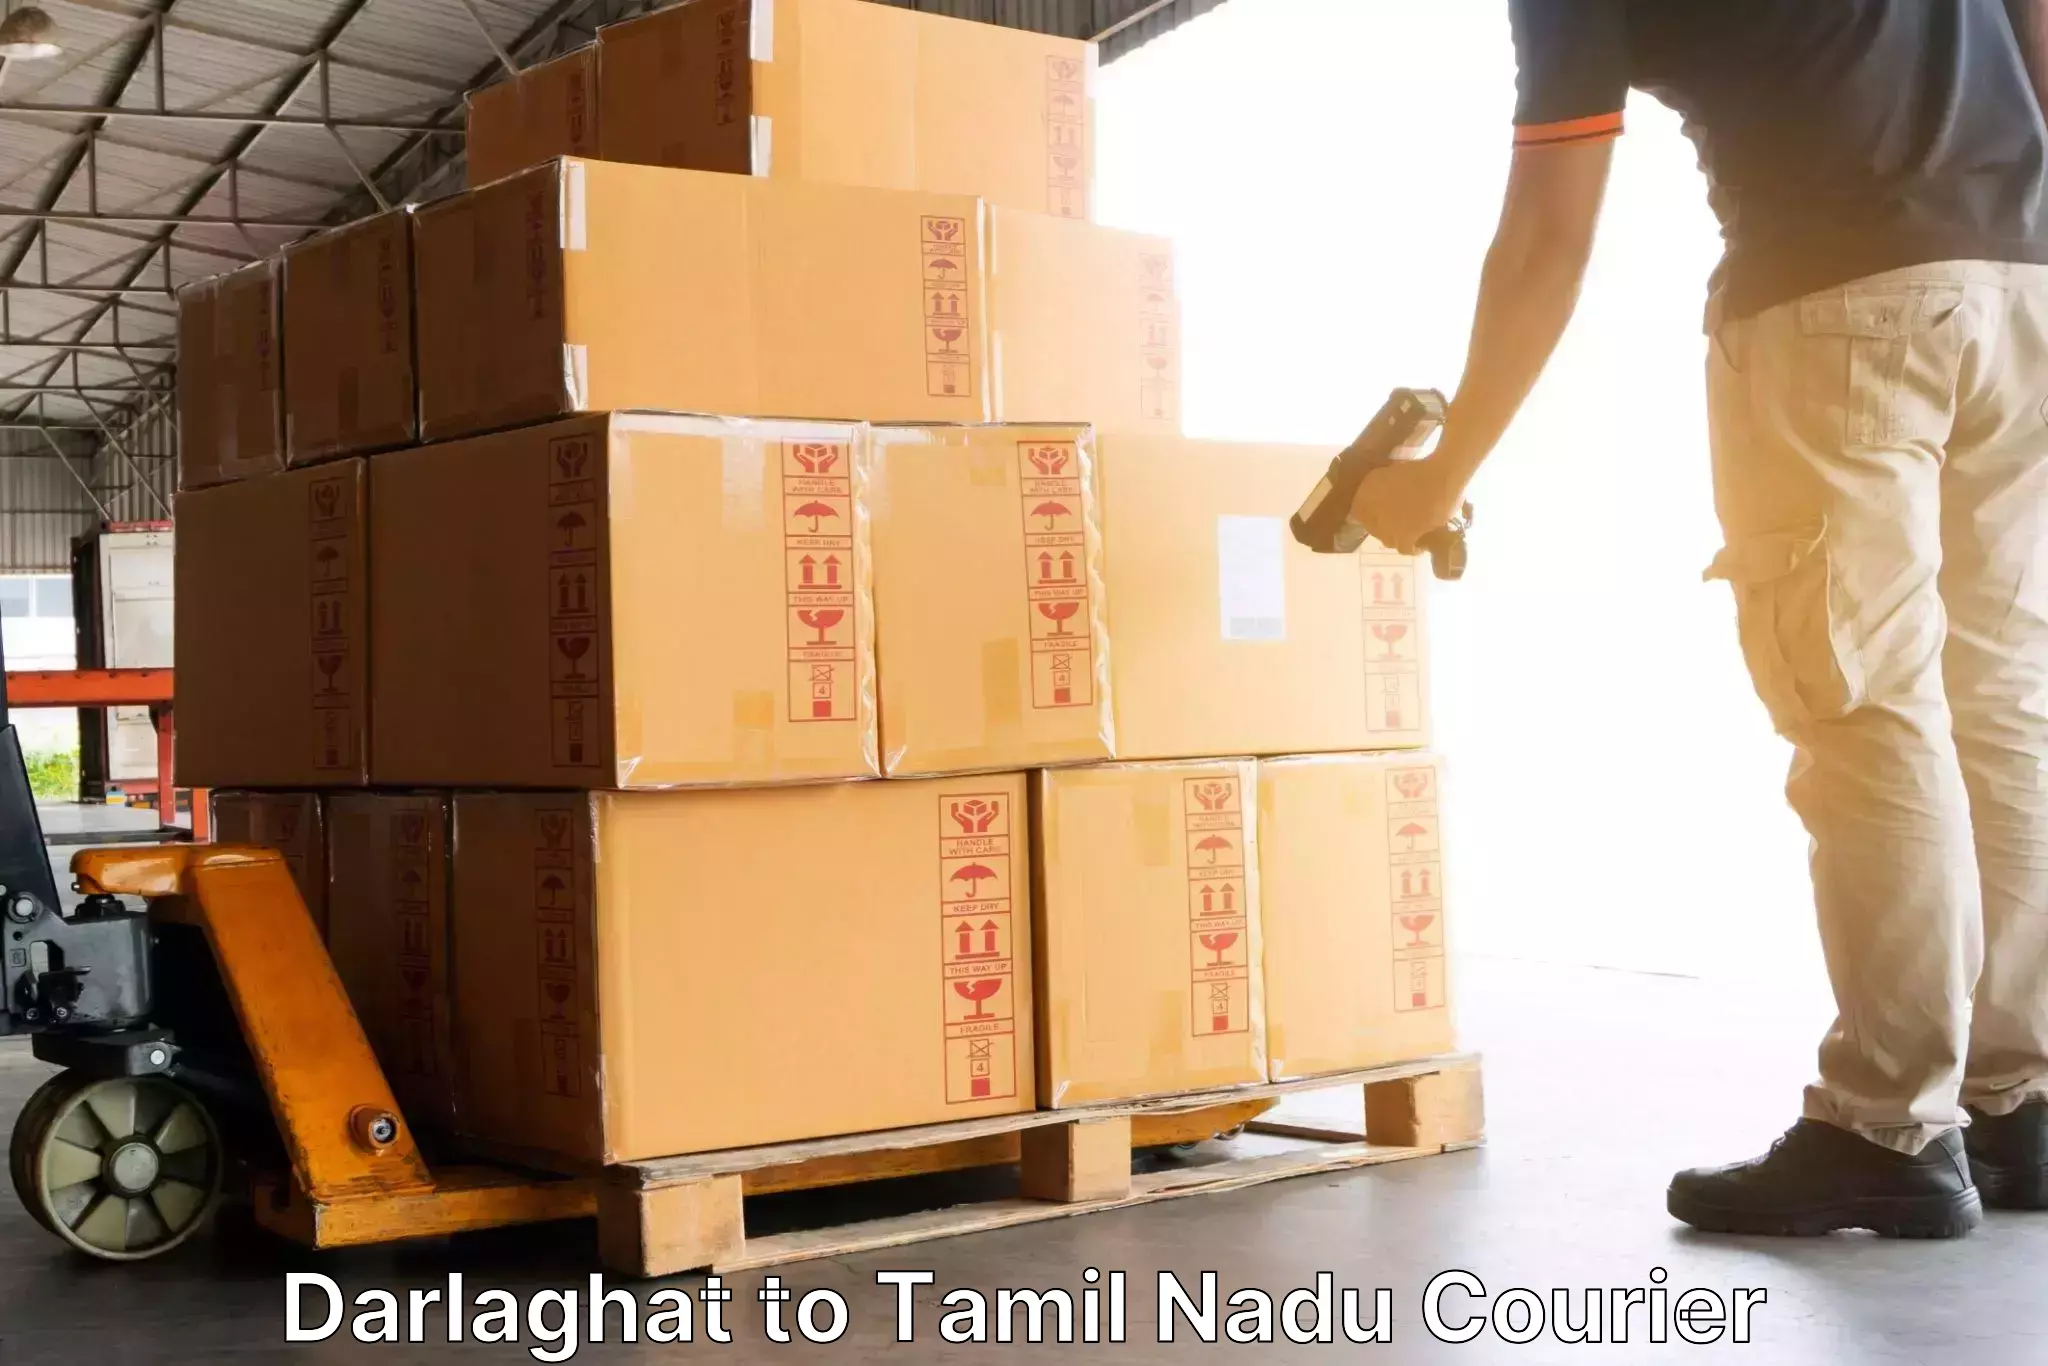 Advanced courier platforms Darlaghat to Ennore Port Chennai